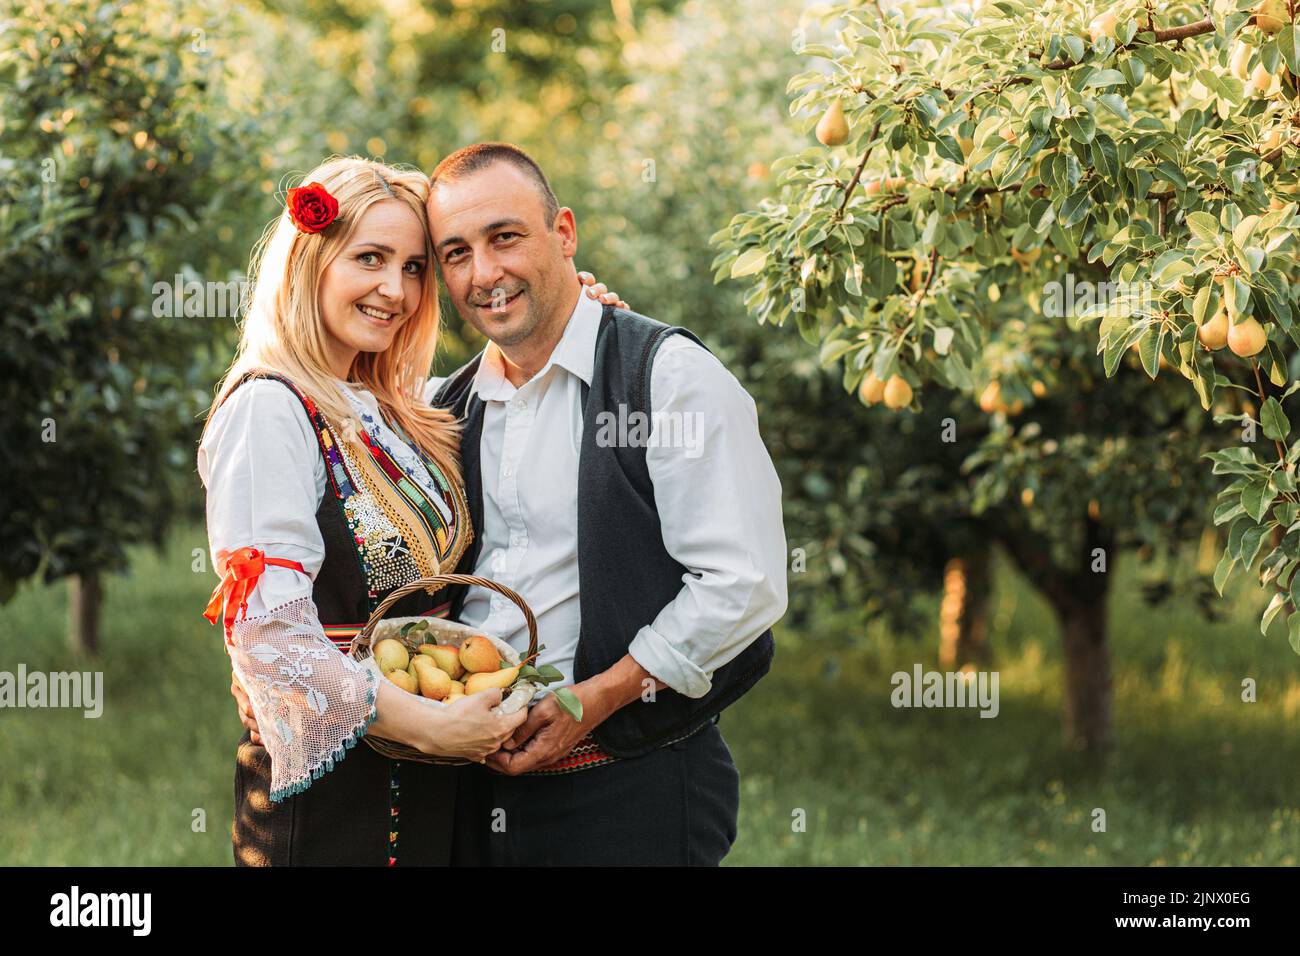 Young couple in Serbian traditional holding a basket with fresh pears Stock Photo